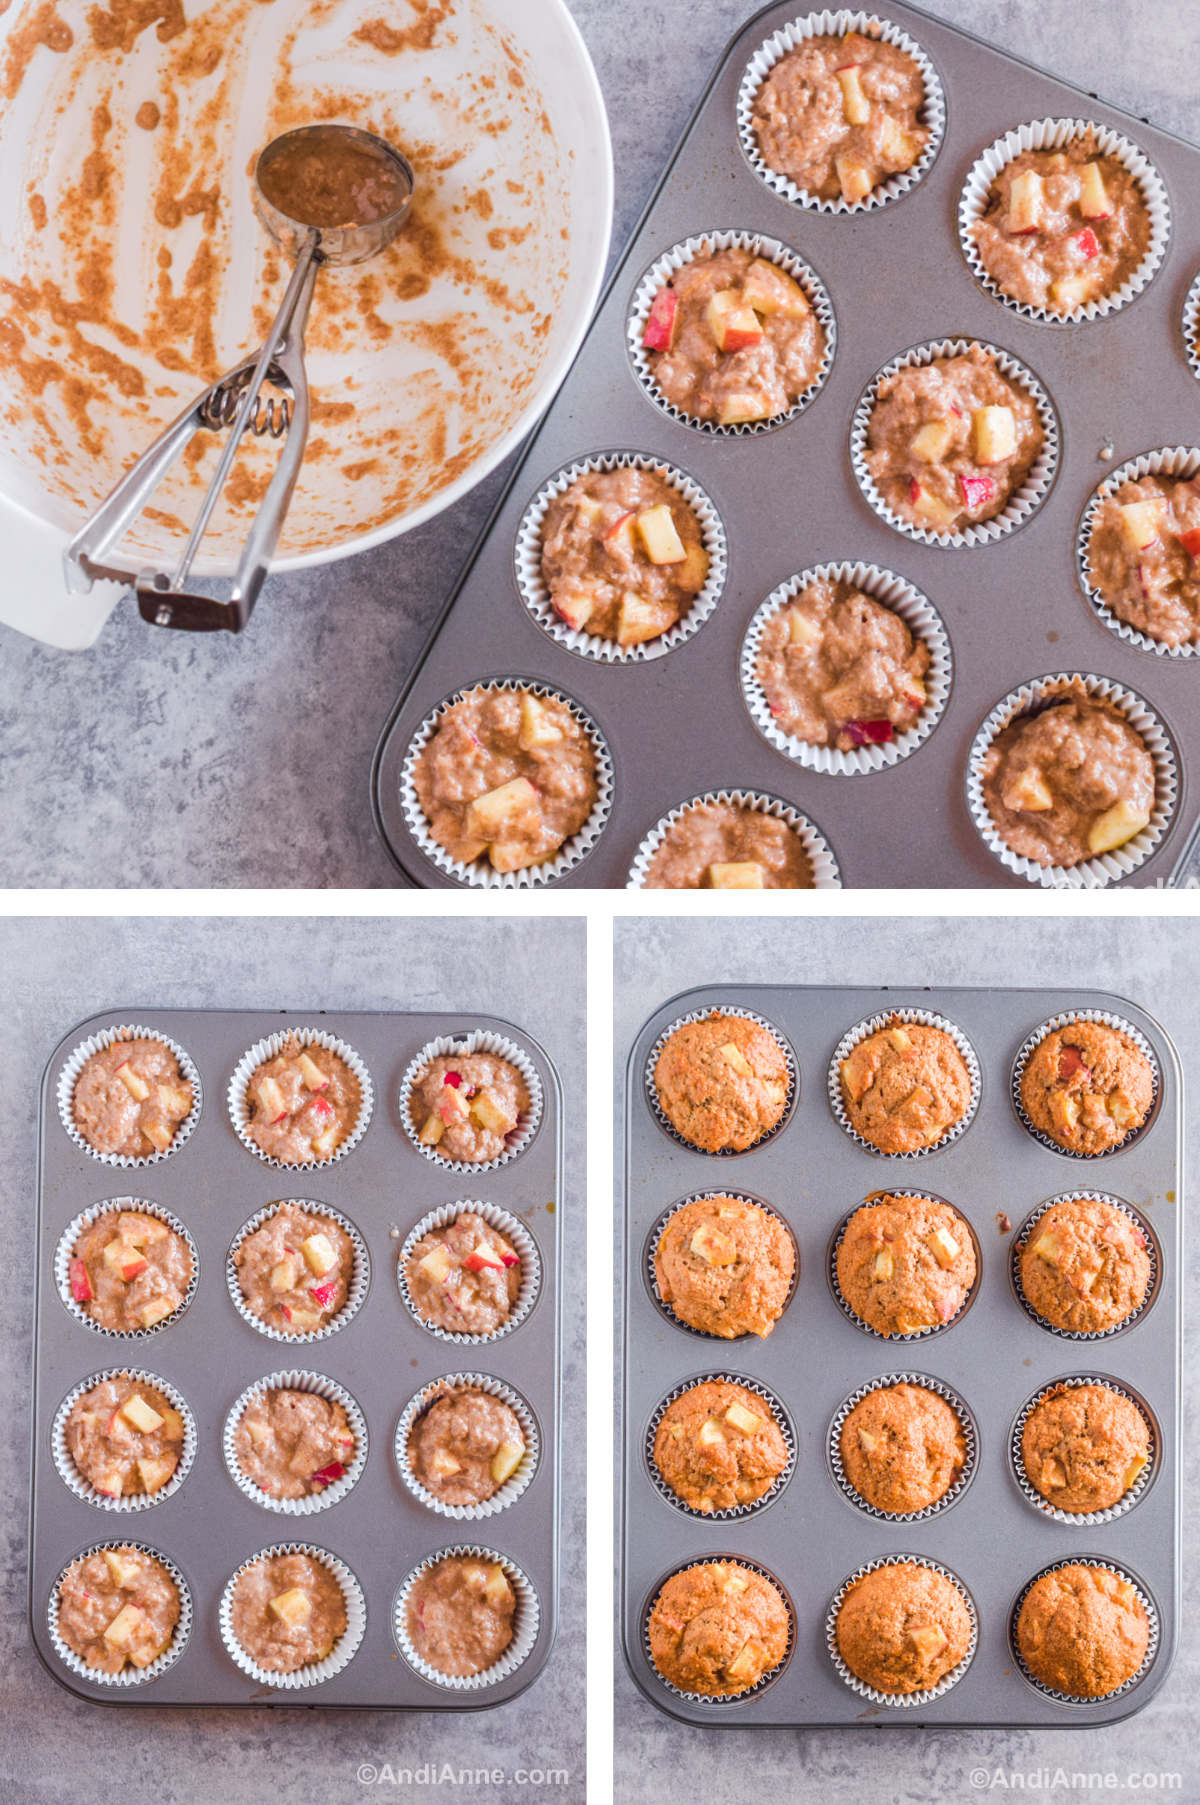 Three overhead images in one: 1. Batter added to muffin tin. 2. Batter added to muffin tin full view. 3. View of all muffins in tin and baked. 